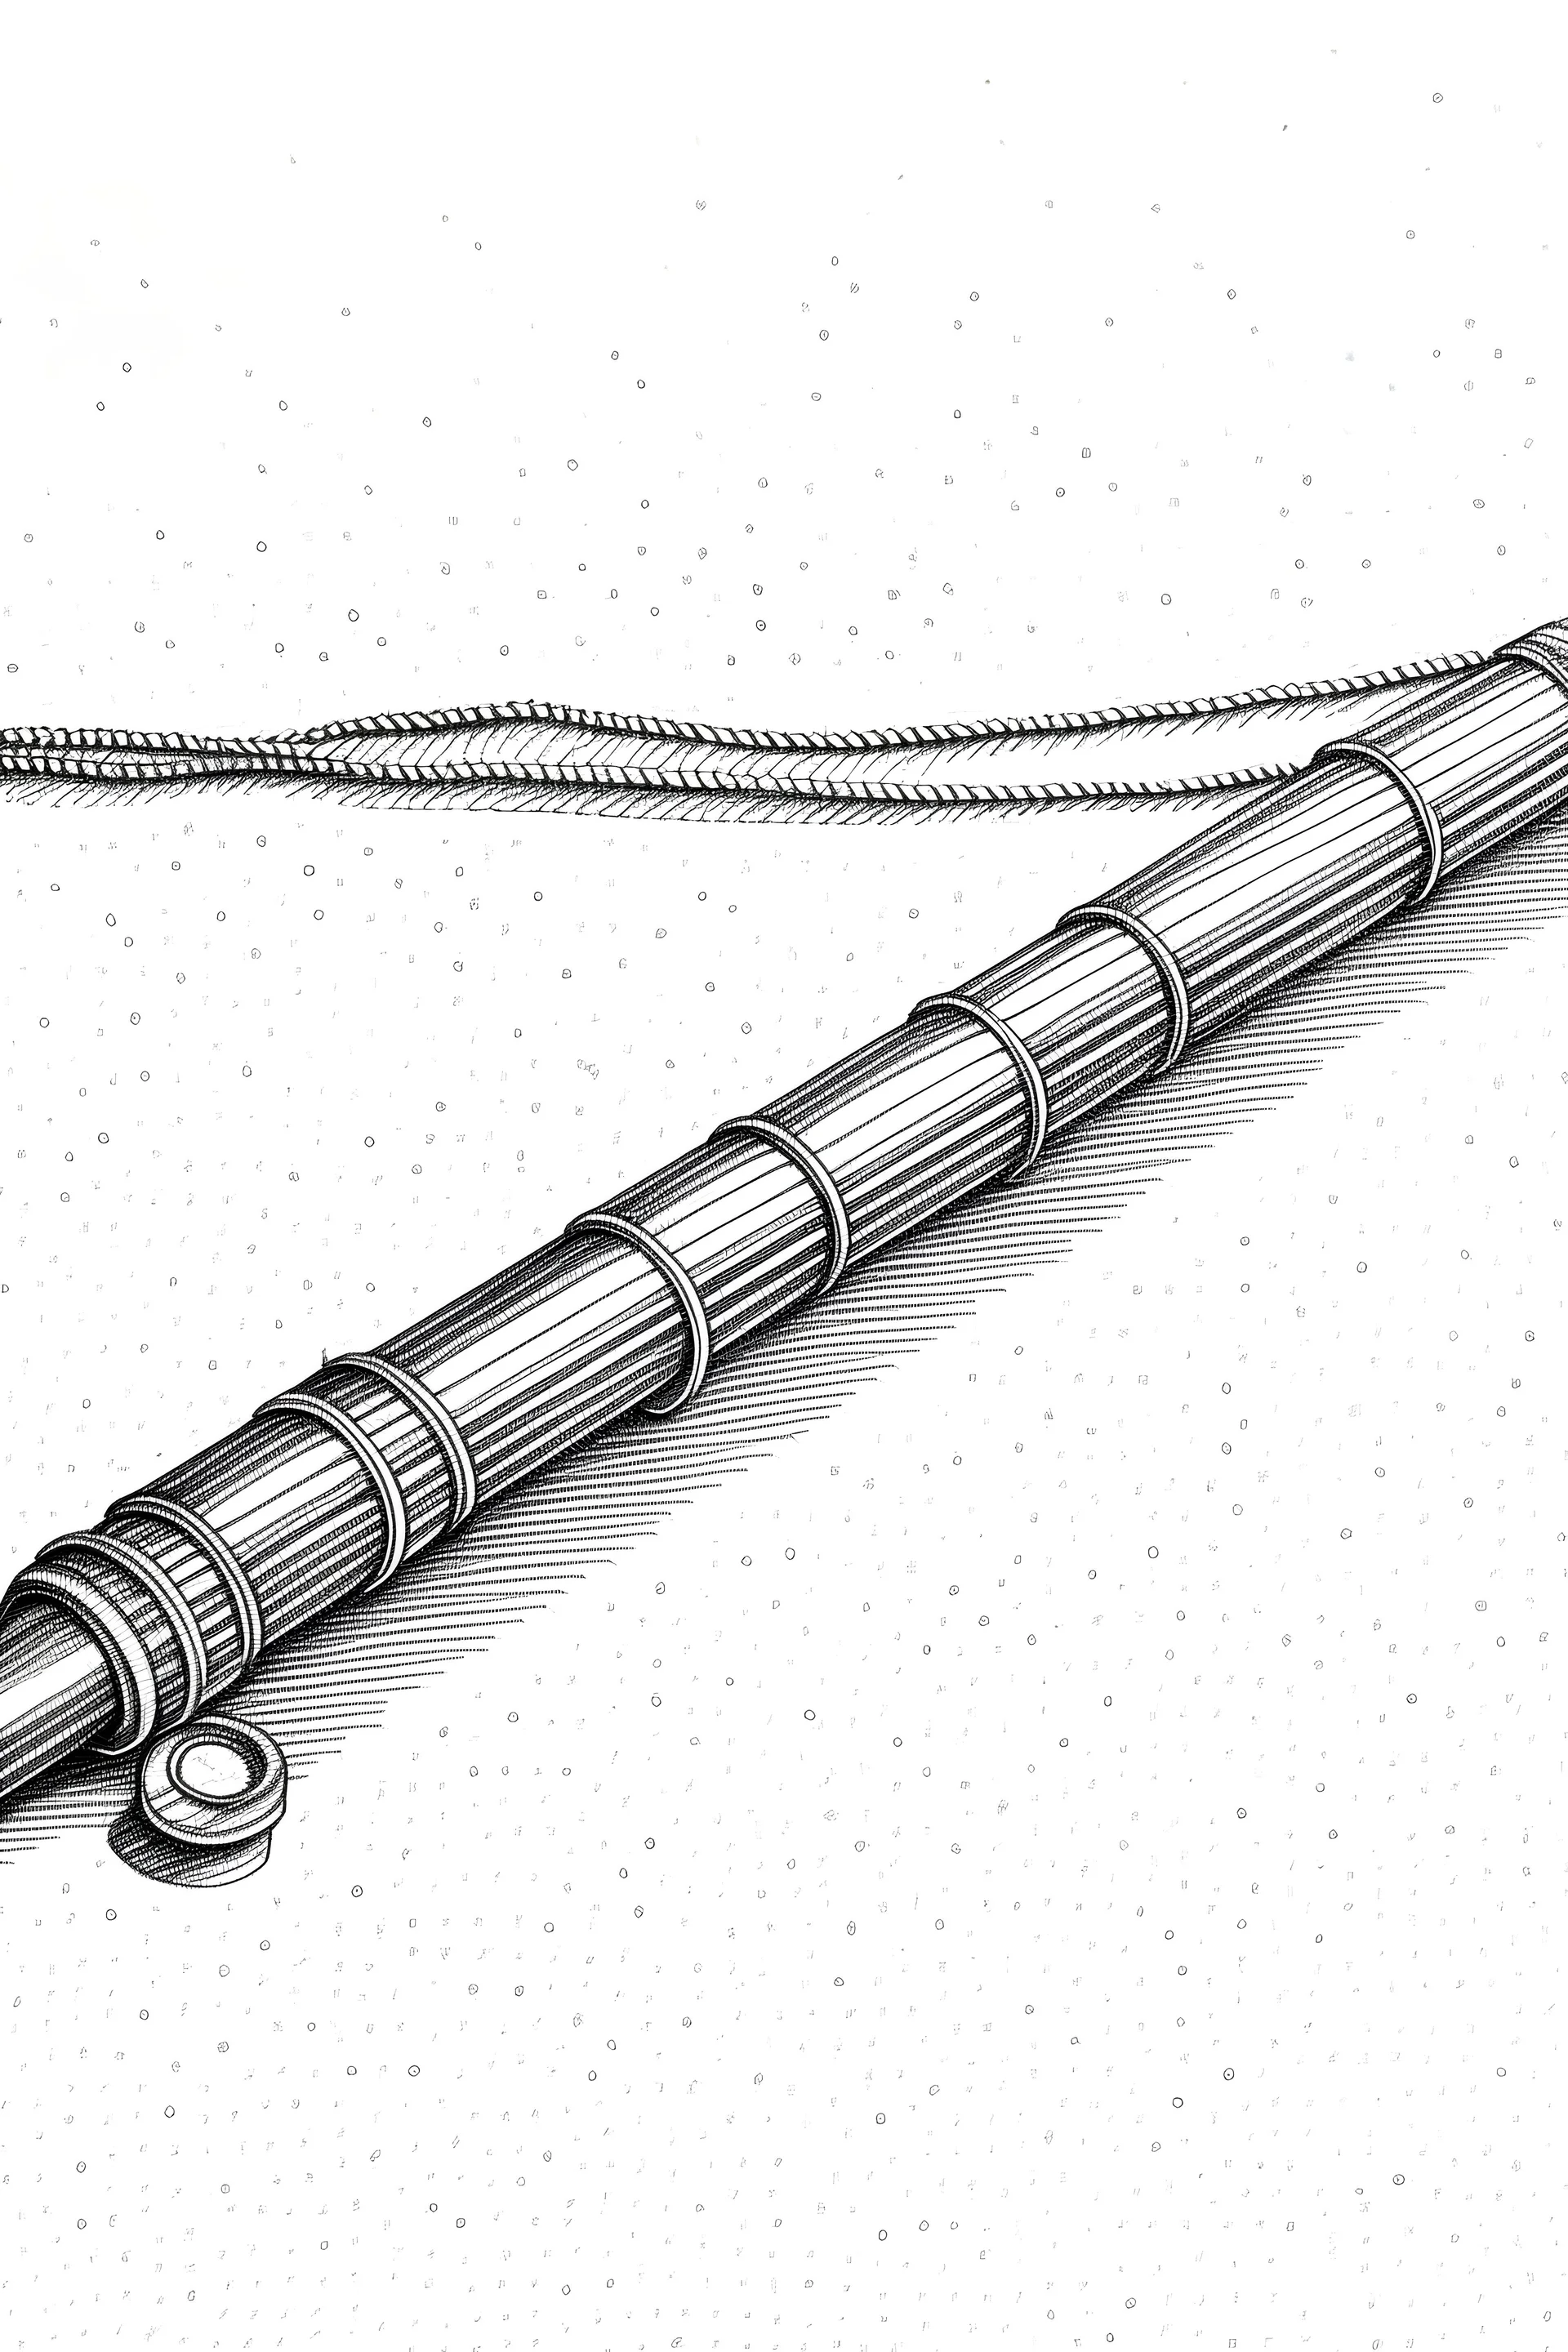 A pencil drawing of a fishing rod with f, Gallery